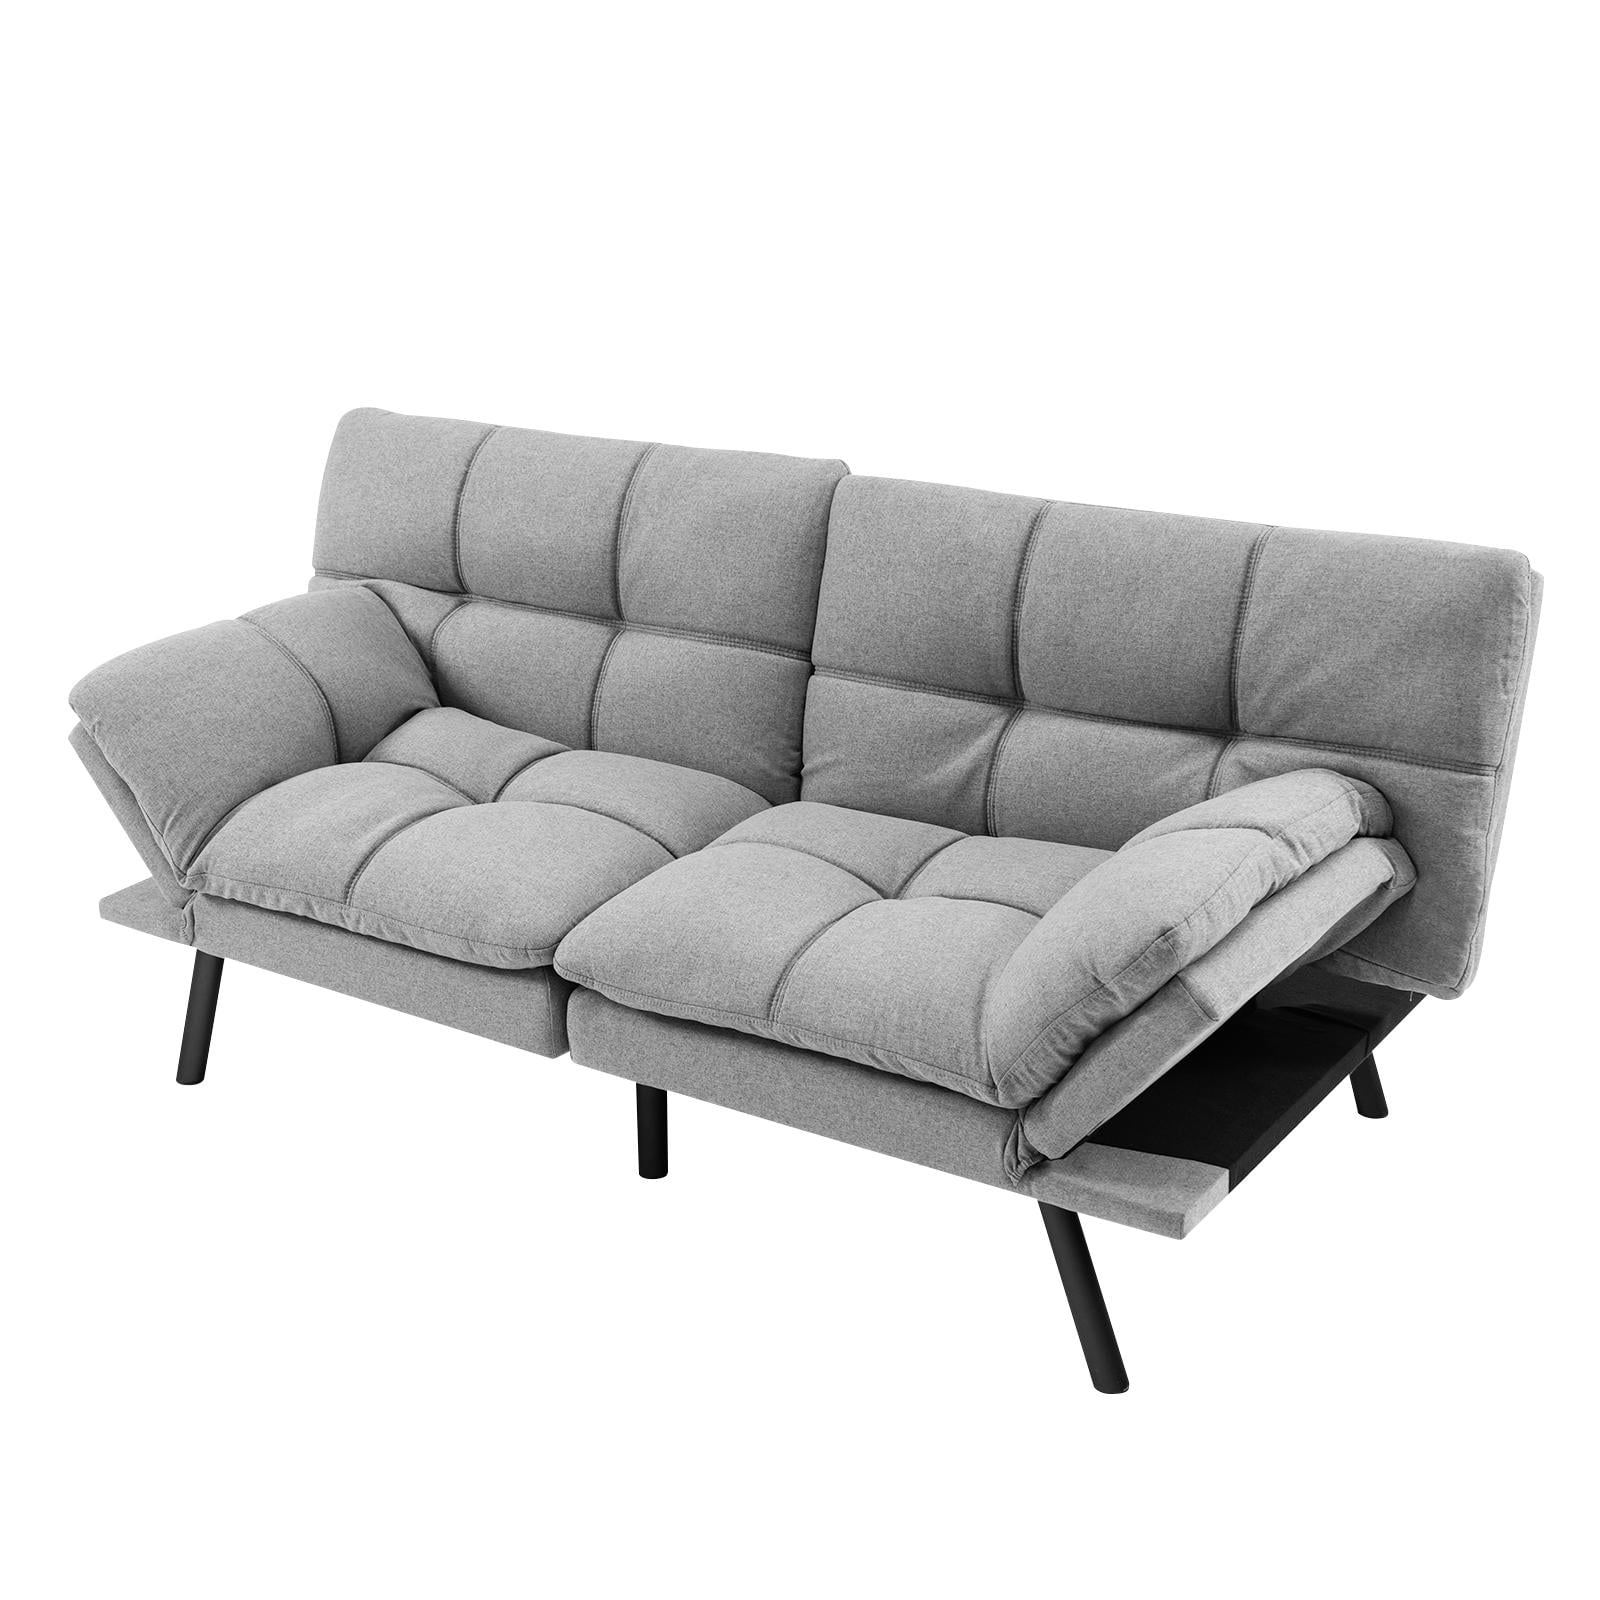 Memory Foam Couch Sleeper Convertible Futon Sofa Bed w/ Adjustable